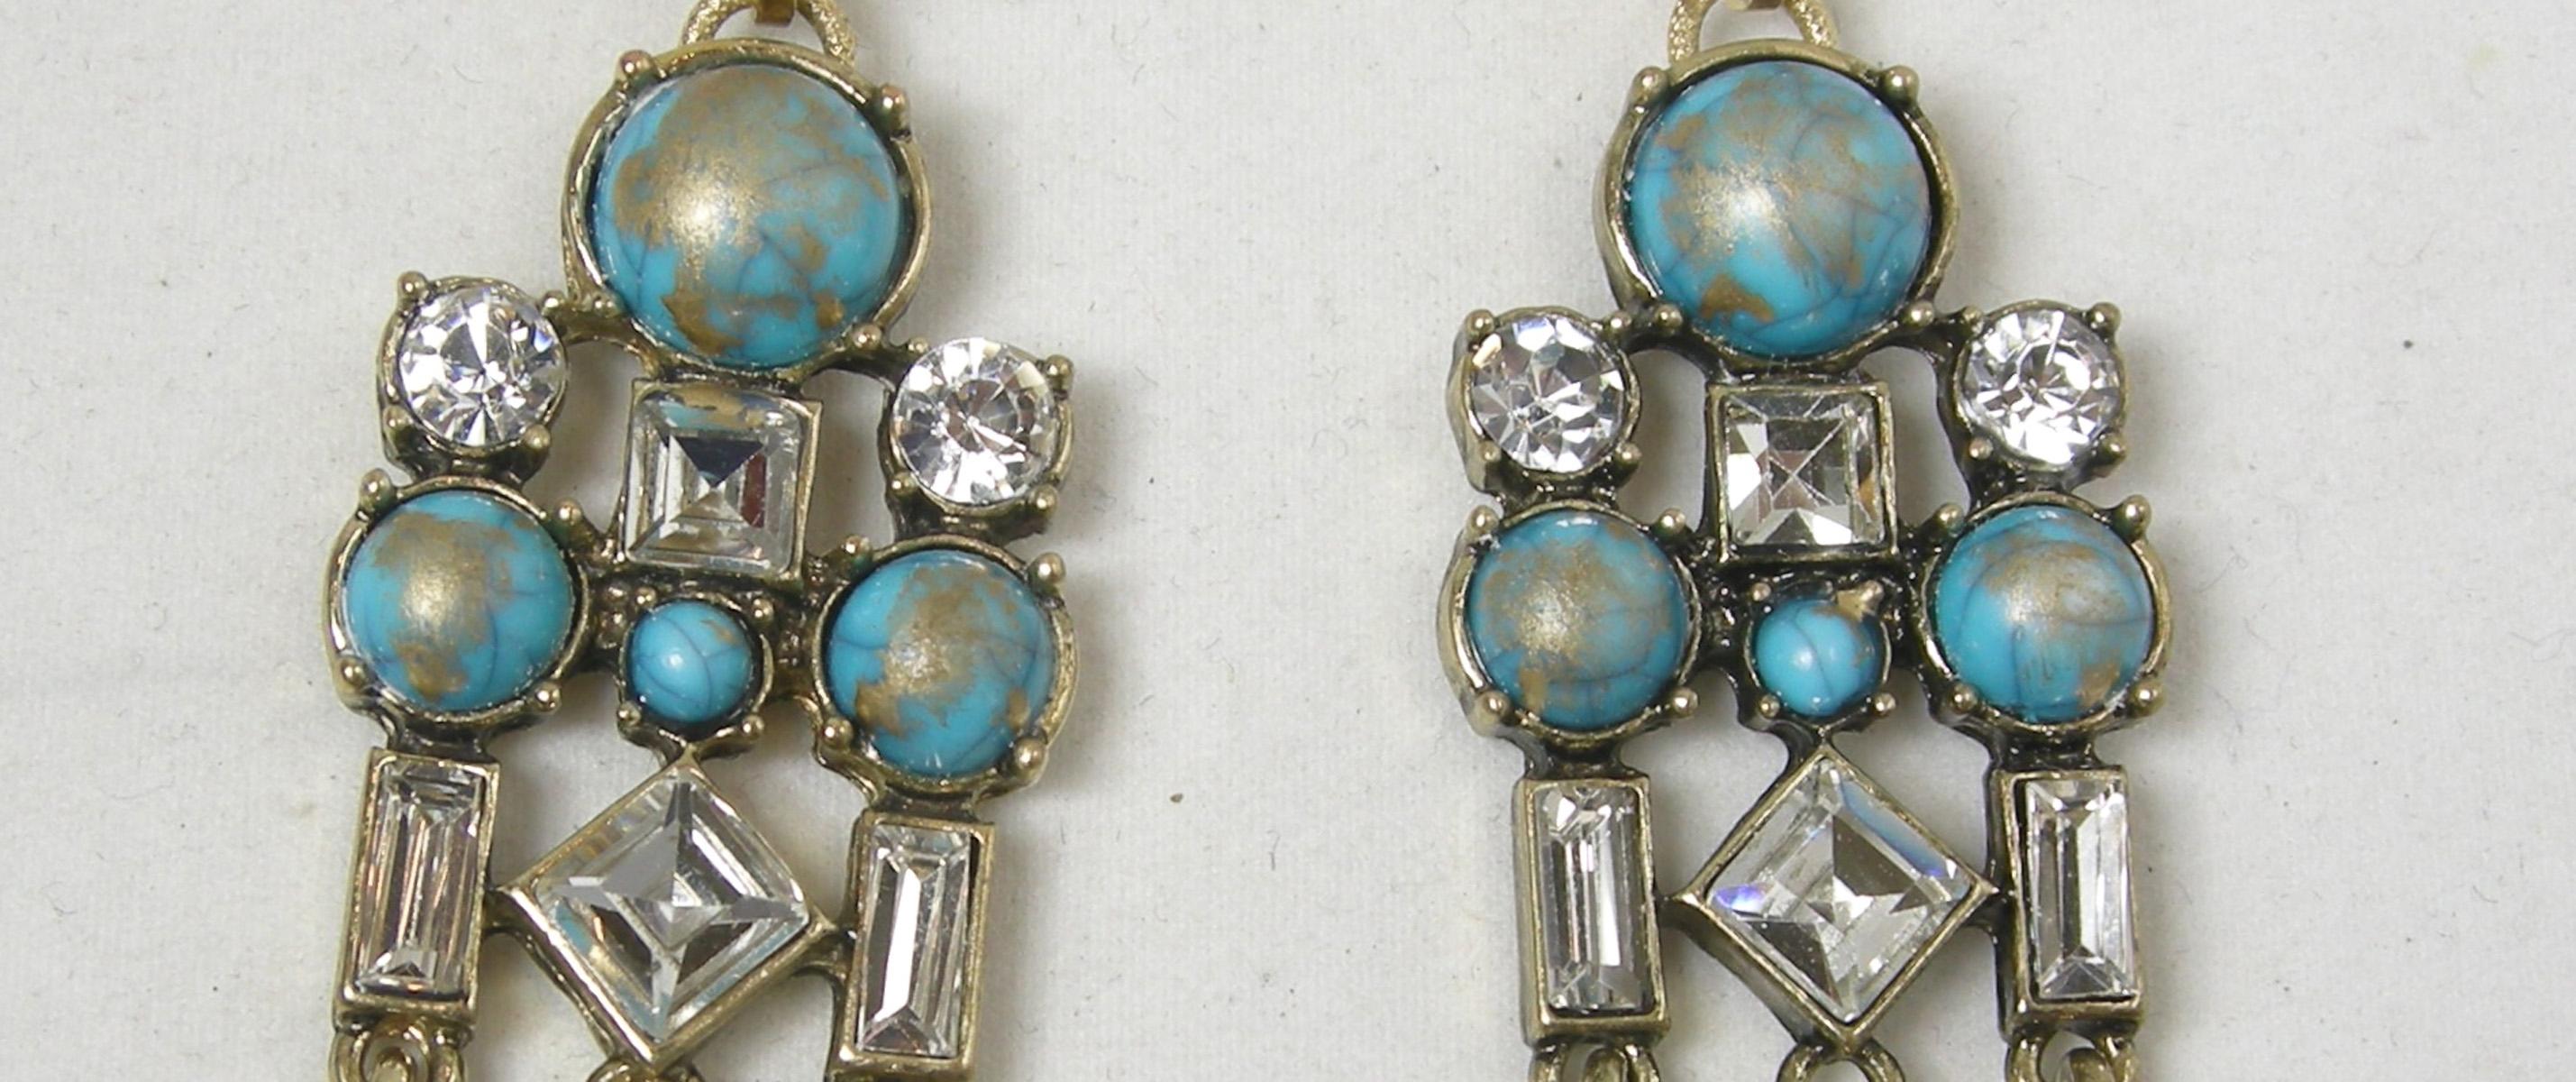 Women's Vintage Faux Turquoise And Rhinestone Dangling Earrings